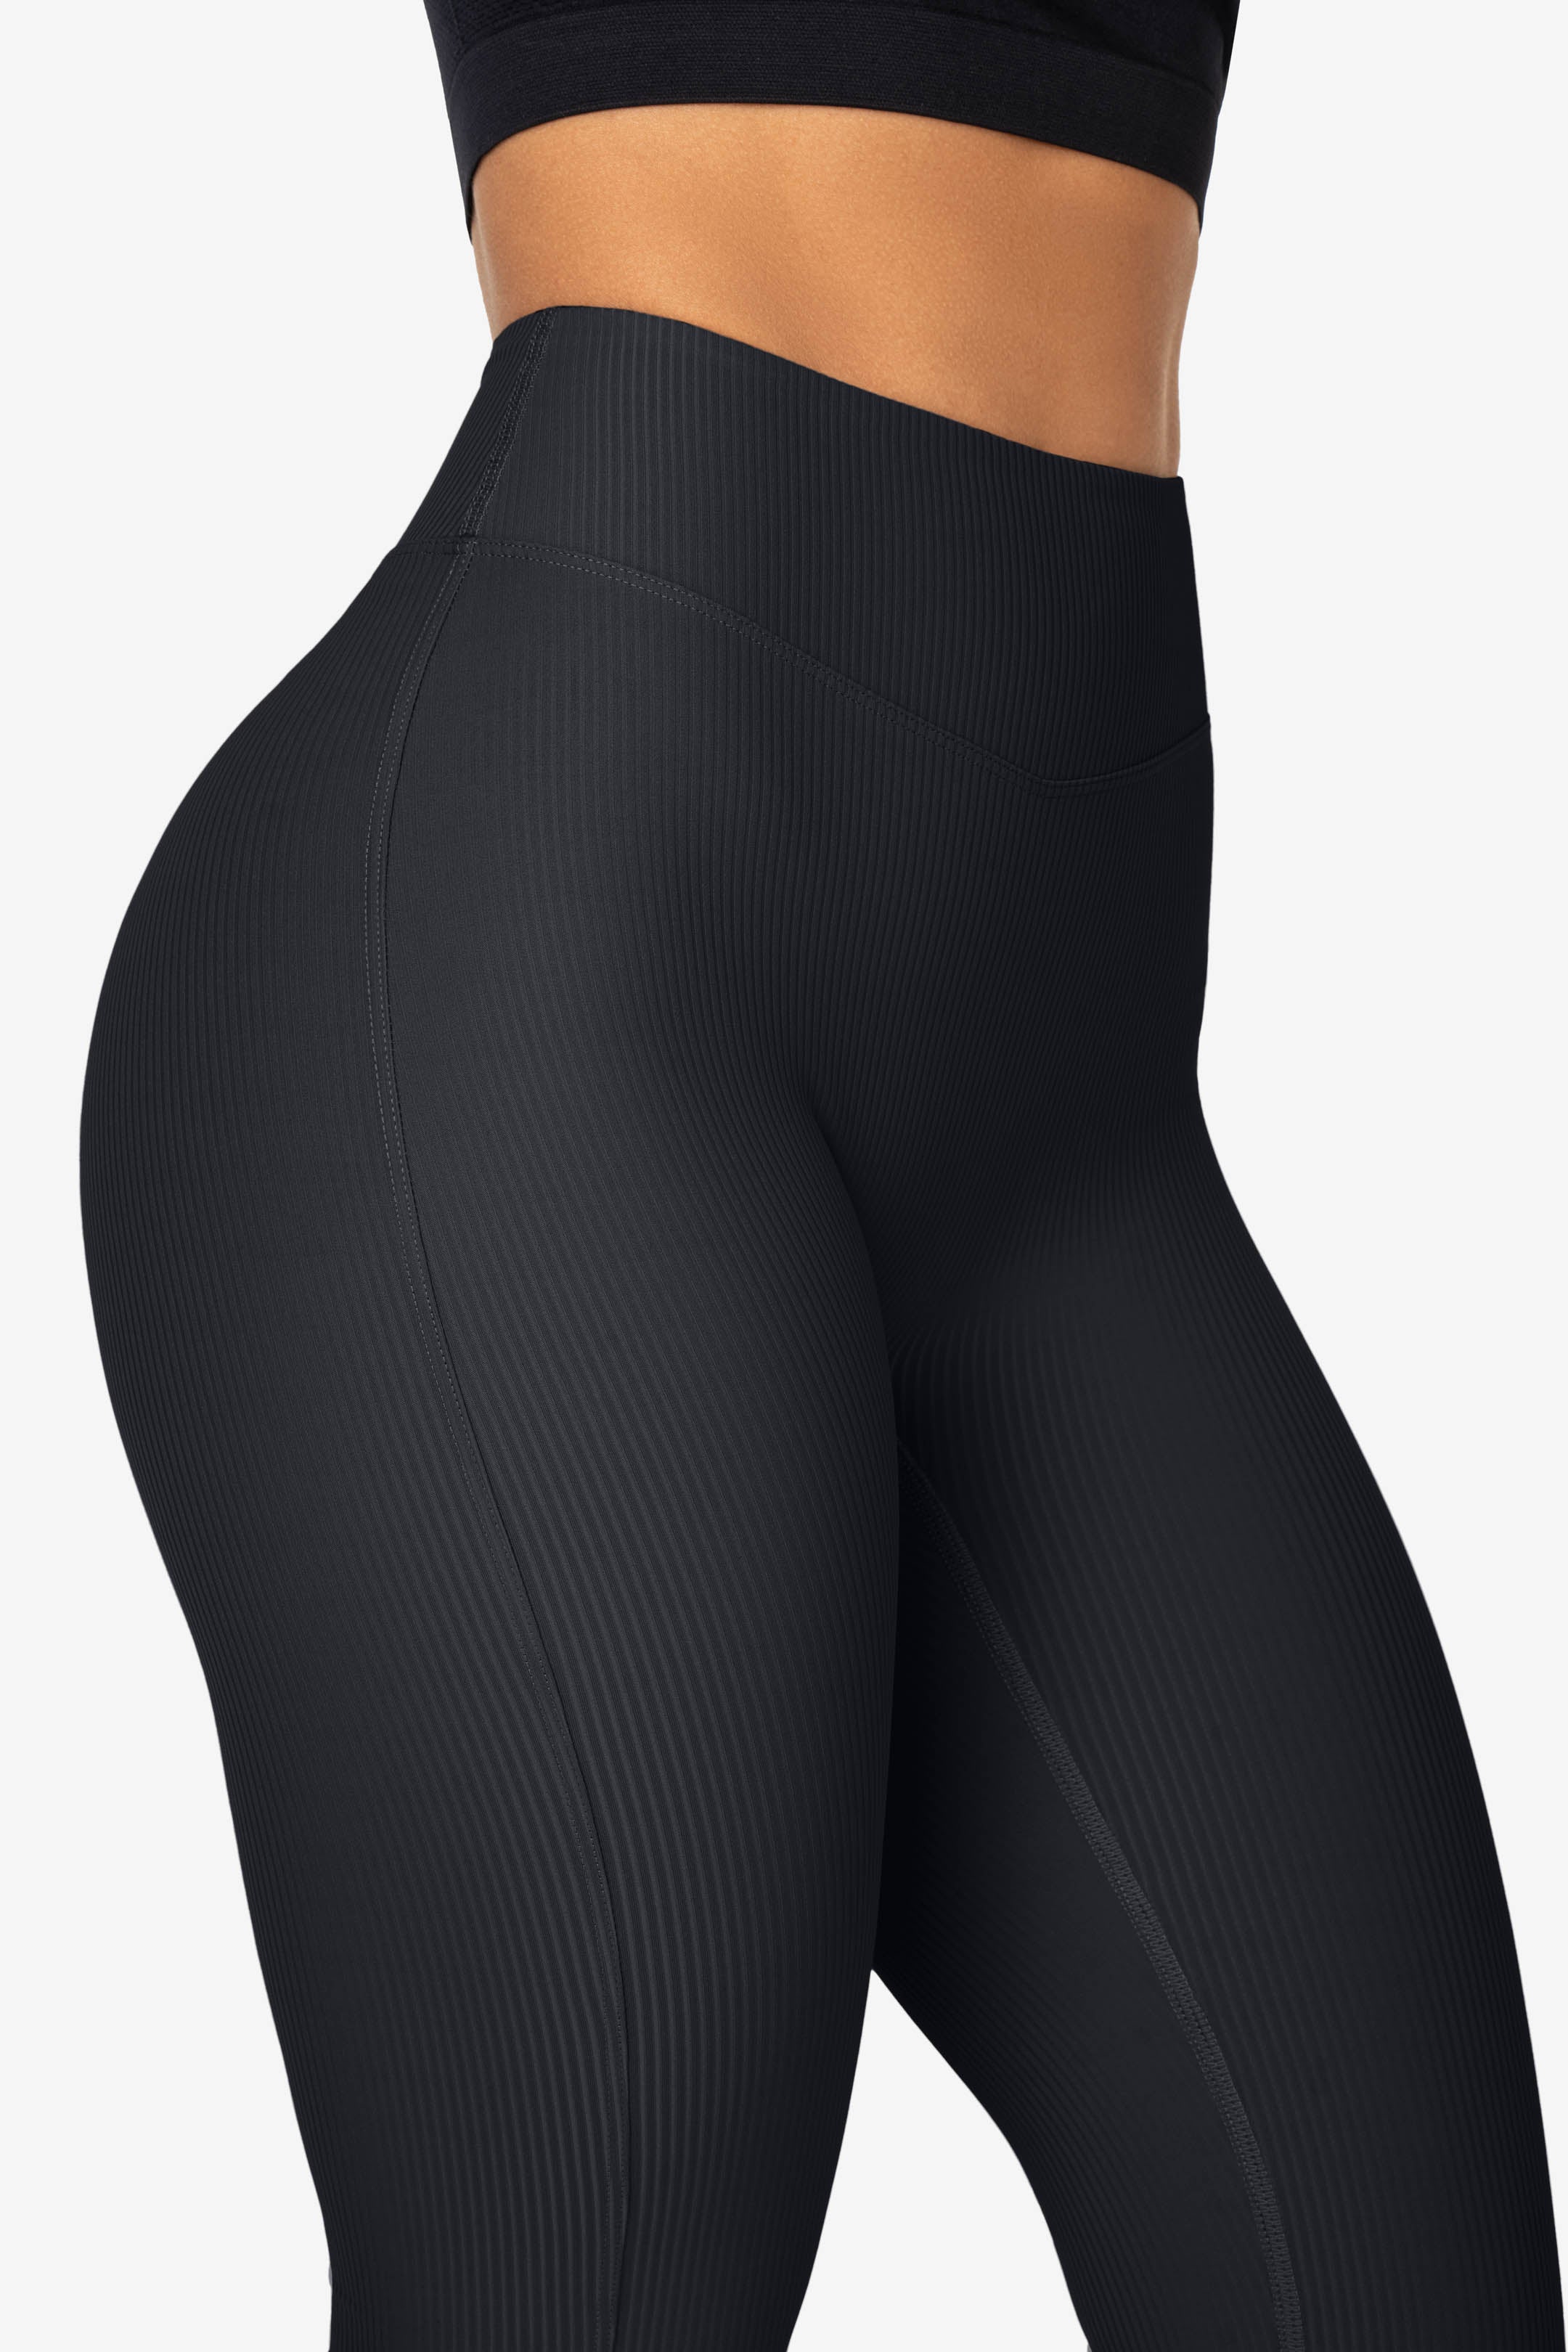 THE GYM PEOPLE Women's Crossover High Waist Flare Workout Leggings Bootcut  Bell Bottom Yoga Pants with Tummy Control Black at Amazon Women's Clothing  store